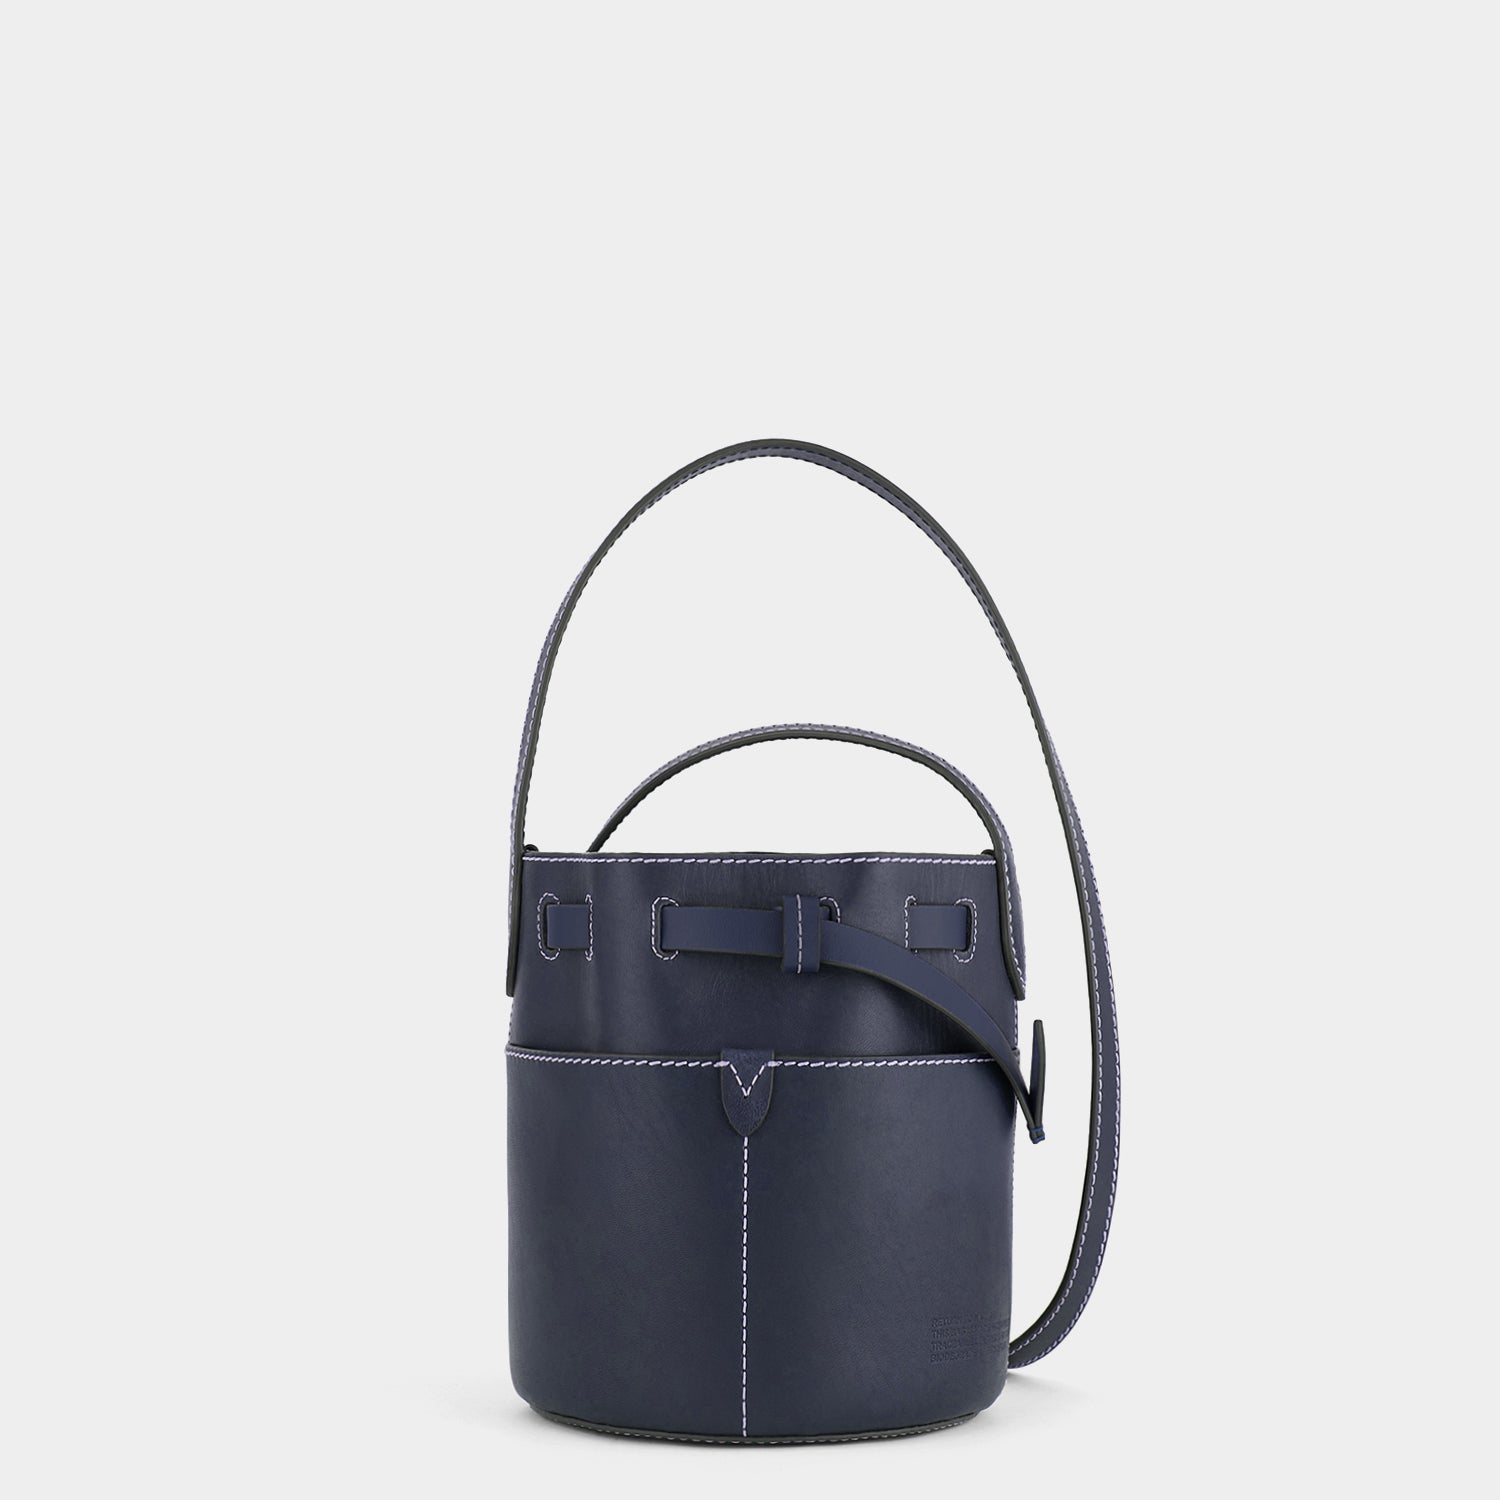 「Return to Nature」バケットバッグ ミニ -

                  
                    Compostable Leather in Marine -
                  

                  Anya Hindmarch JP
